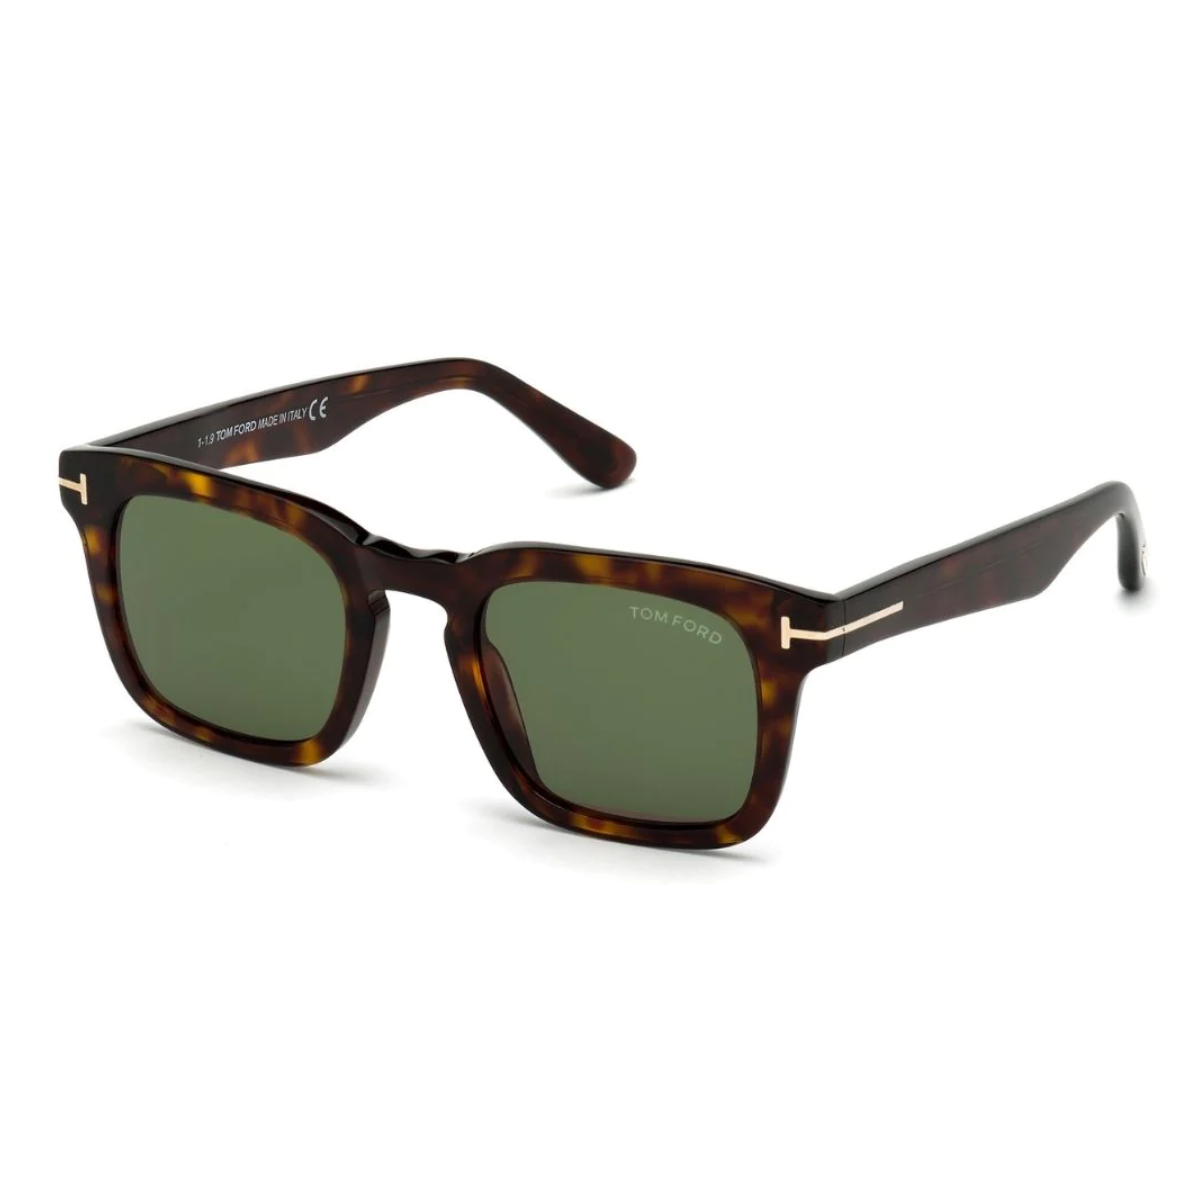 "Fashion-forward individuals wearing Tom Ford 751 unisex sunglasses, demonstrating the versatility of the accessory with its square shape and choice of temple colors in Havana and black."